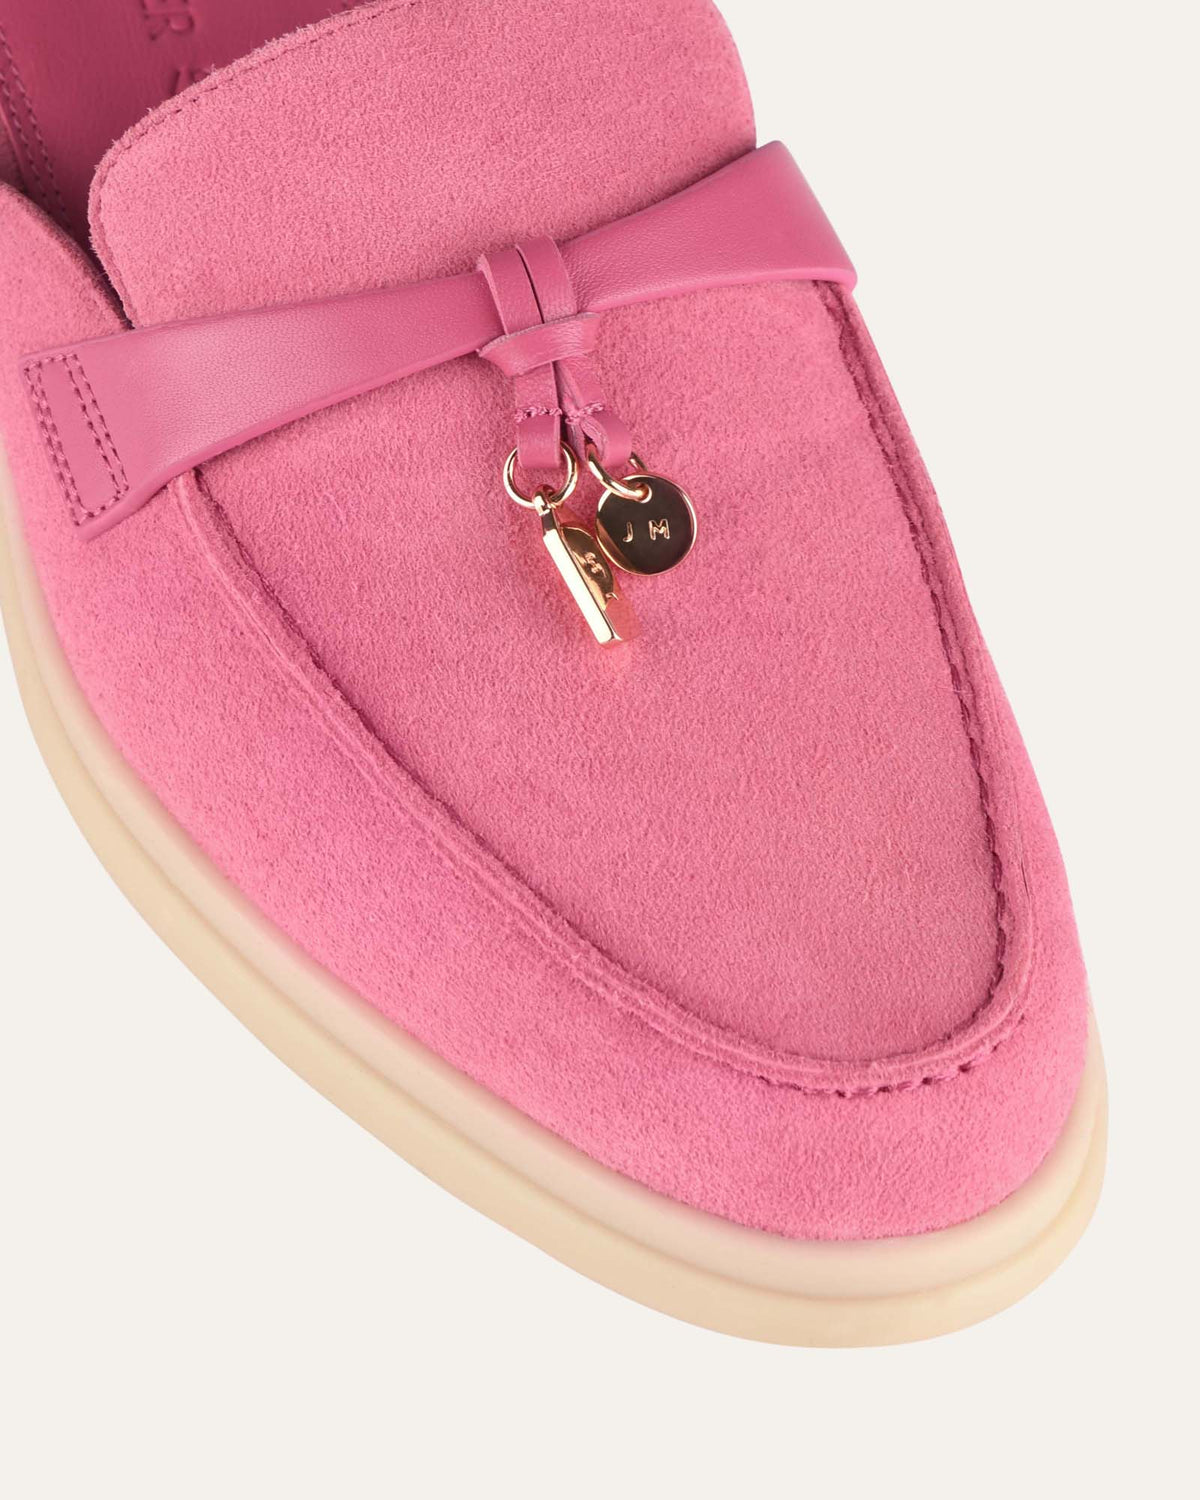 CAMBRIDGE LOAFERS PINK SUEDE